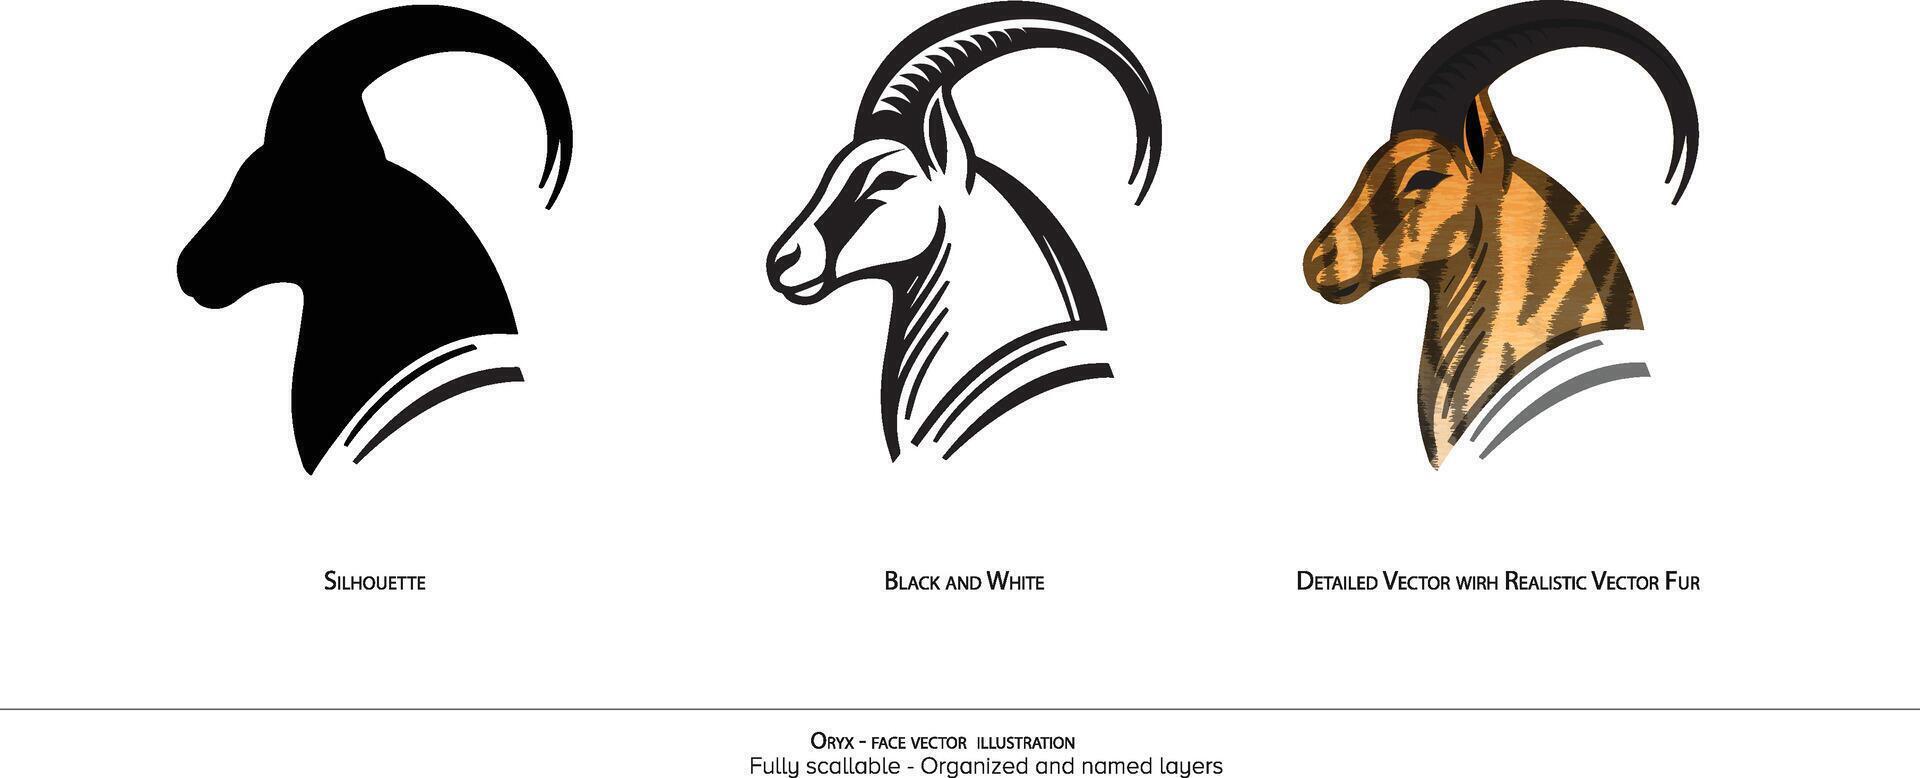 Oryx Face only illustration. Animal drawing. Oryx Detailed illustration. Silhouette, black and white. Organized and named layers vector